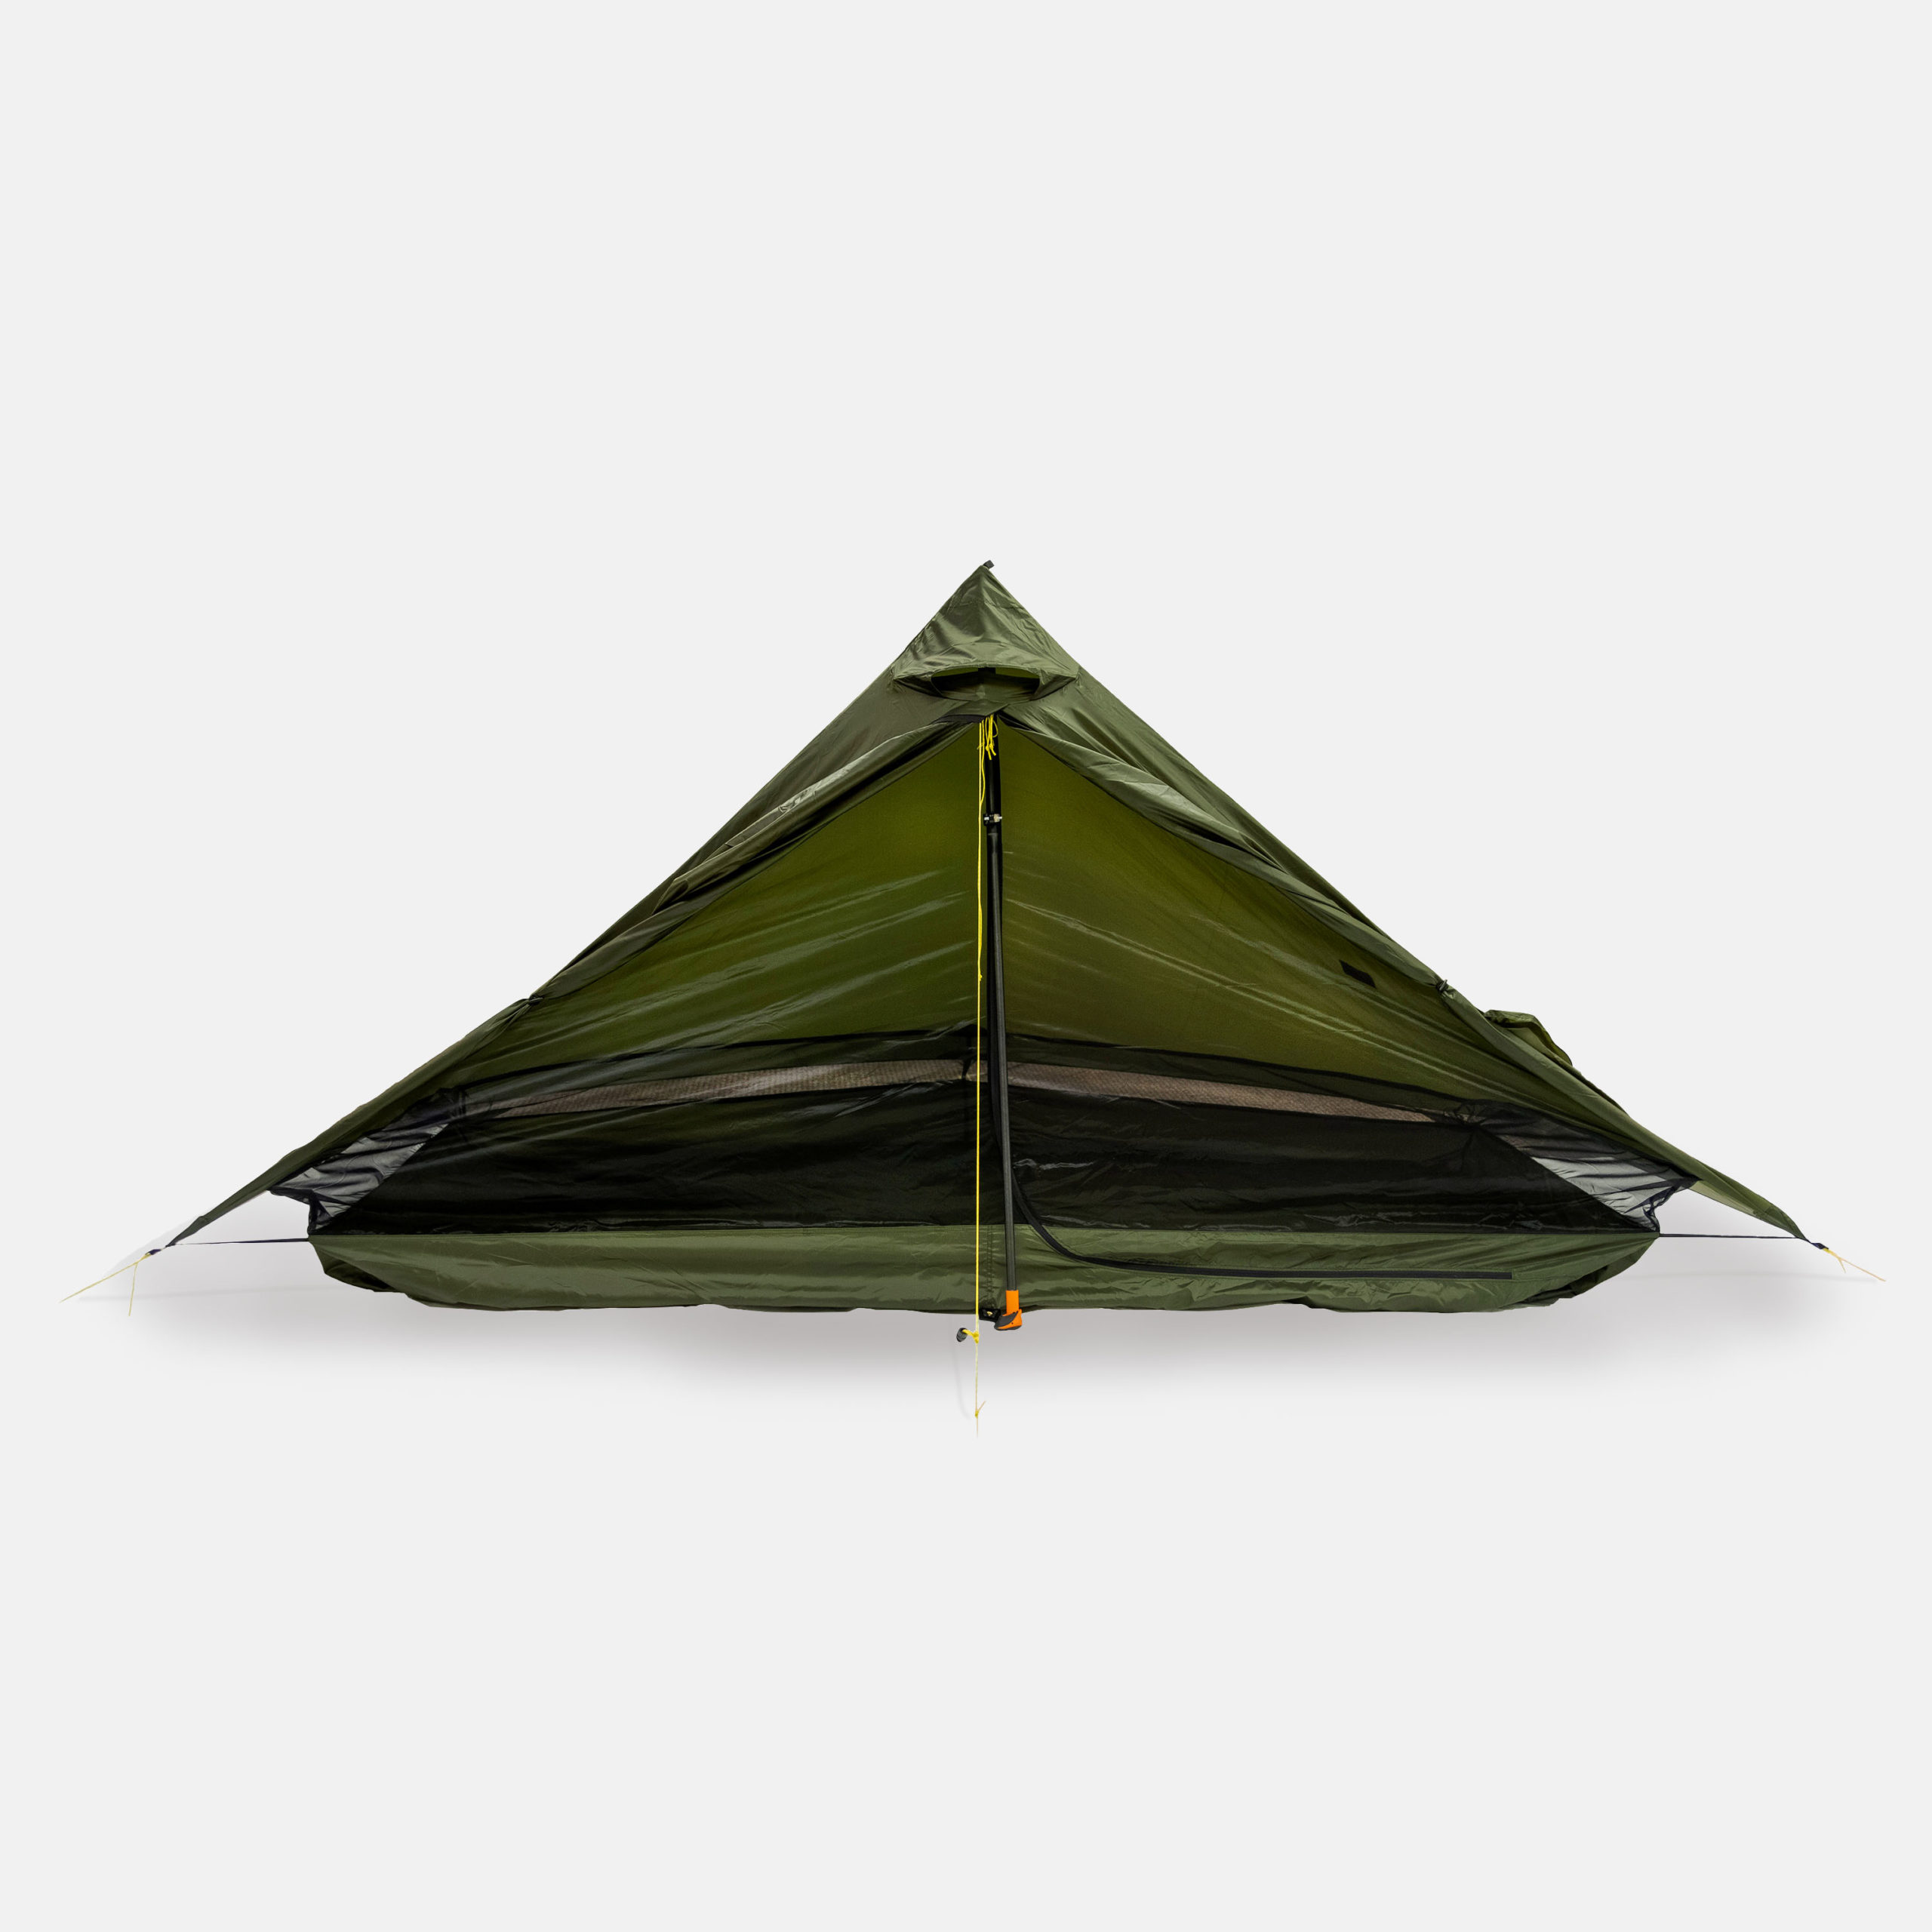 Six Moon Design Lunar Solo Backpacking Tent - Green